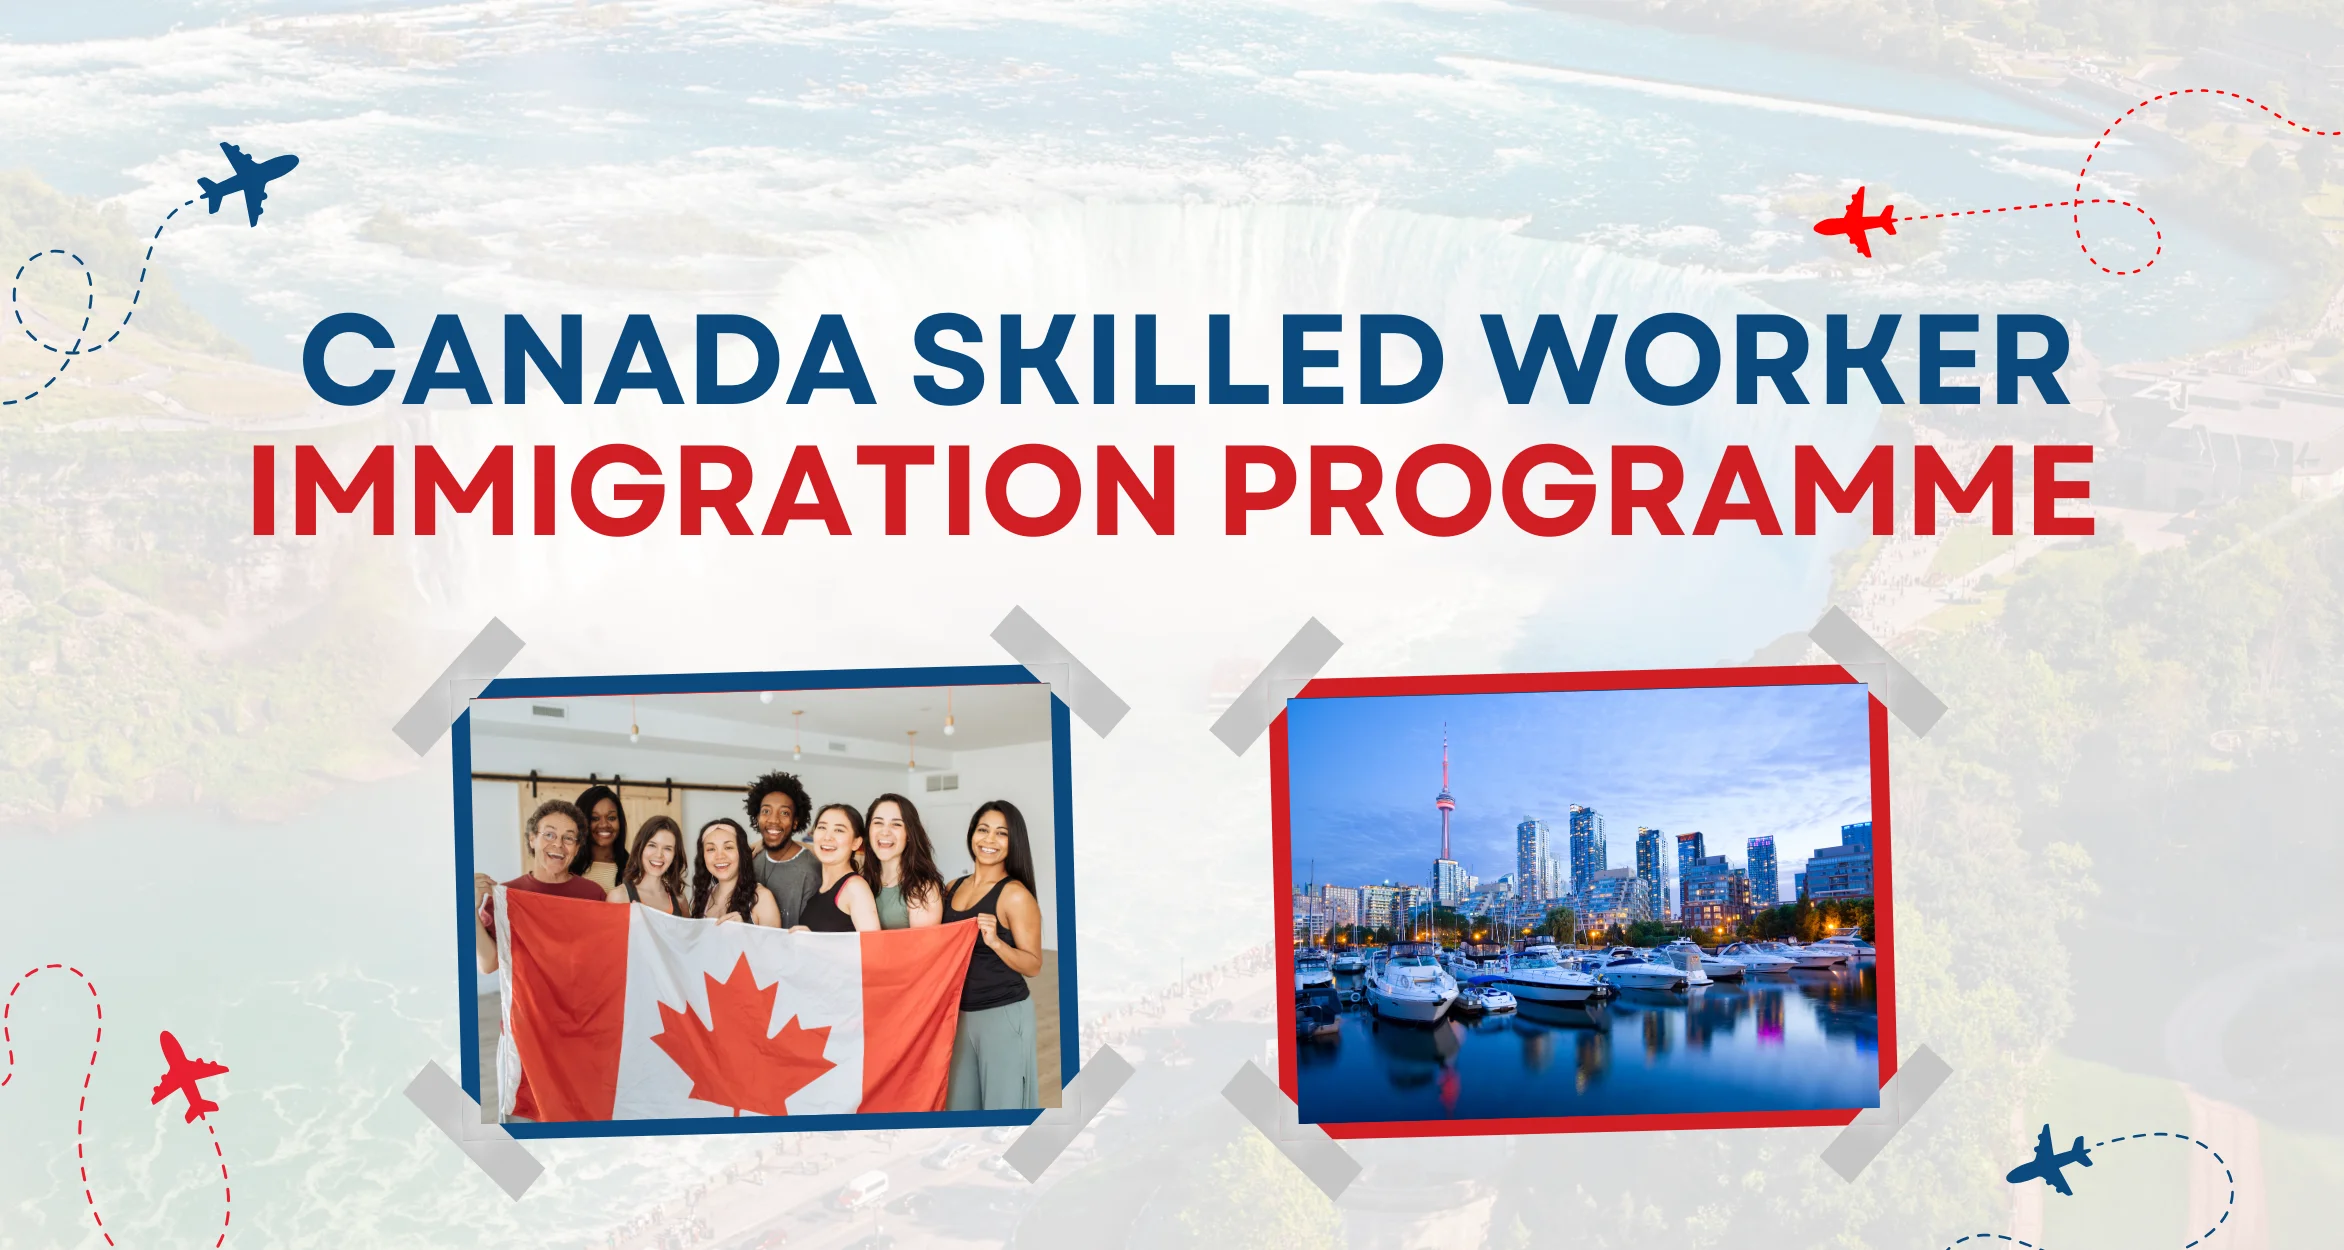 What is Canada skilled worker Immigration programme?